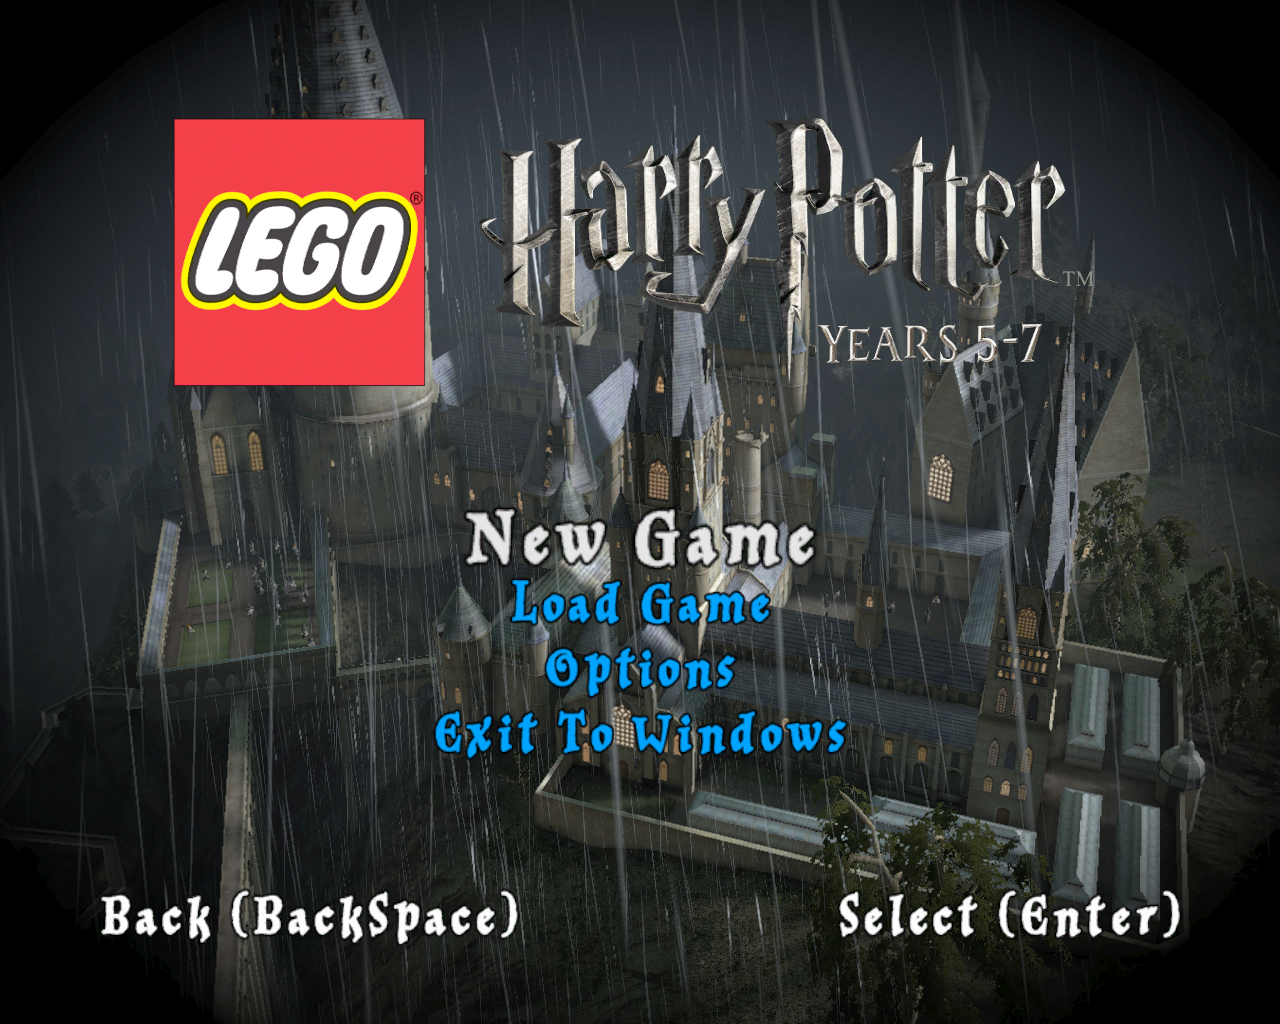 LEGO Harry Potter: Years 5-7 - Xbox 360 Game